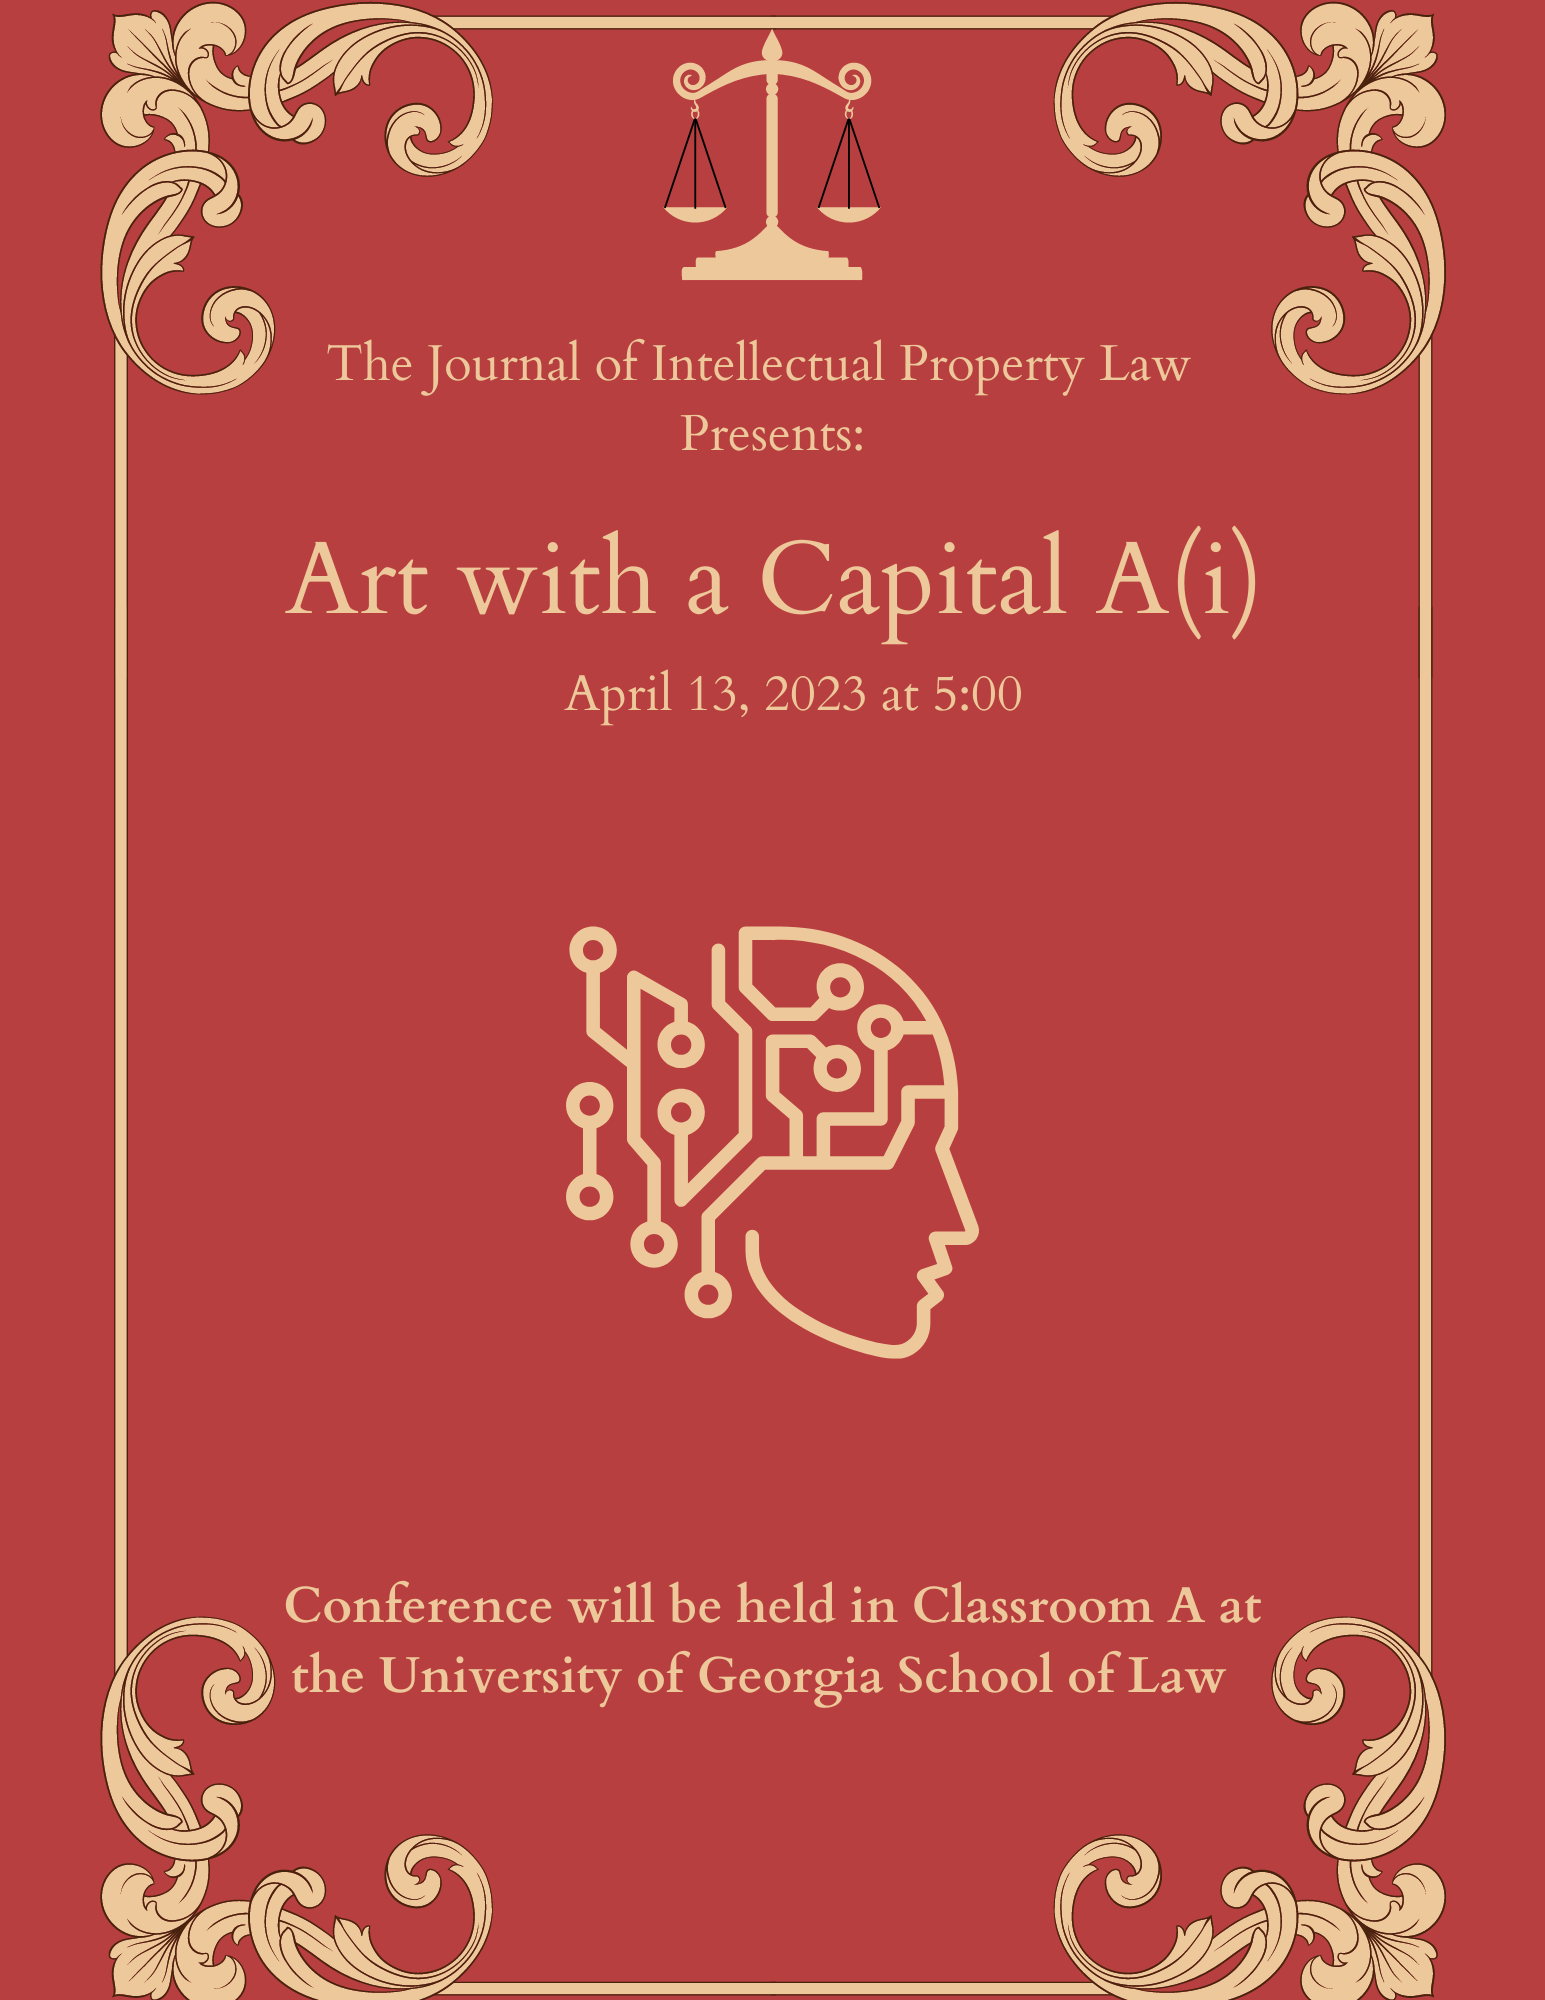 Red and gold flyer on event titled art with a capital a(i)